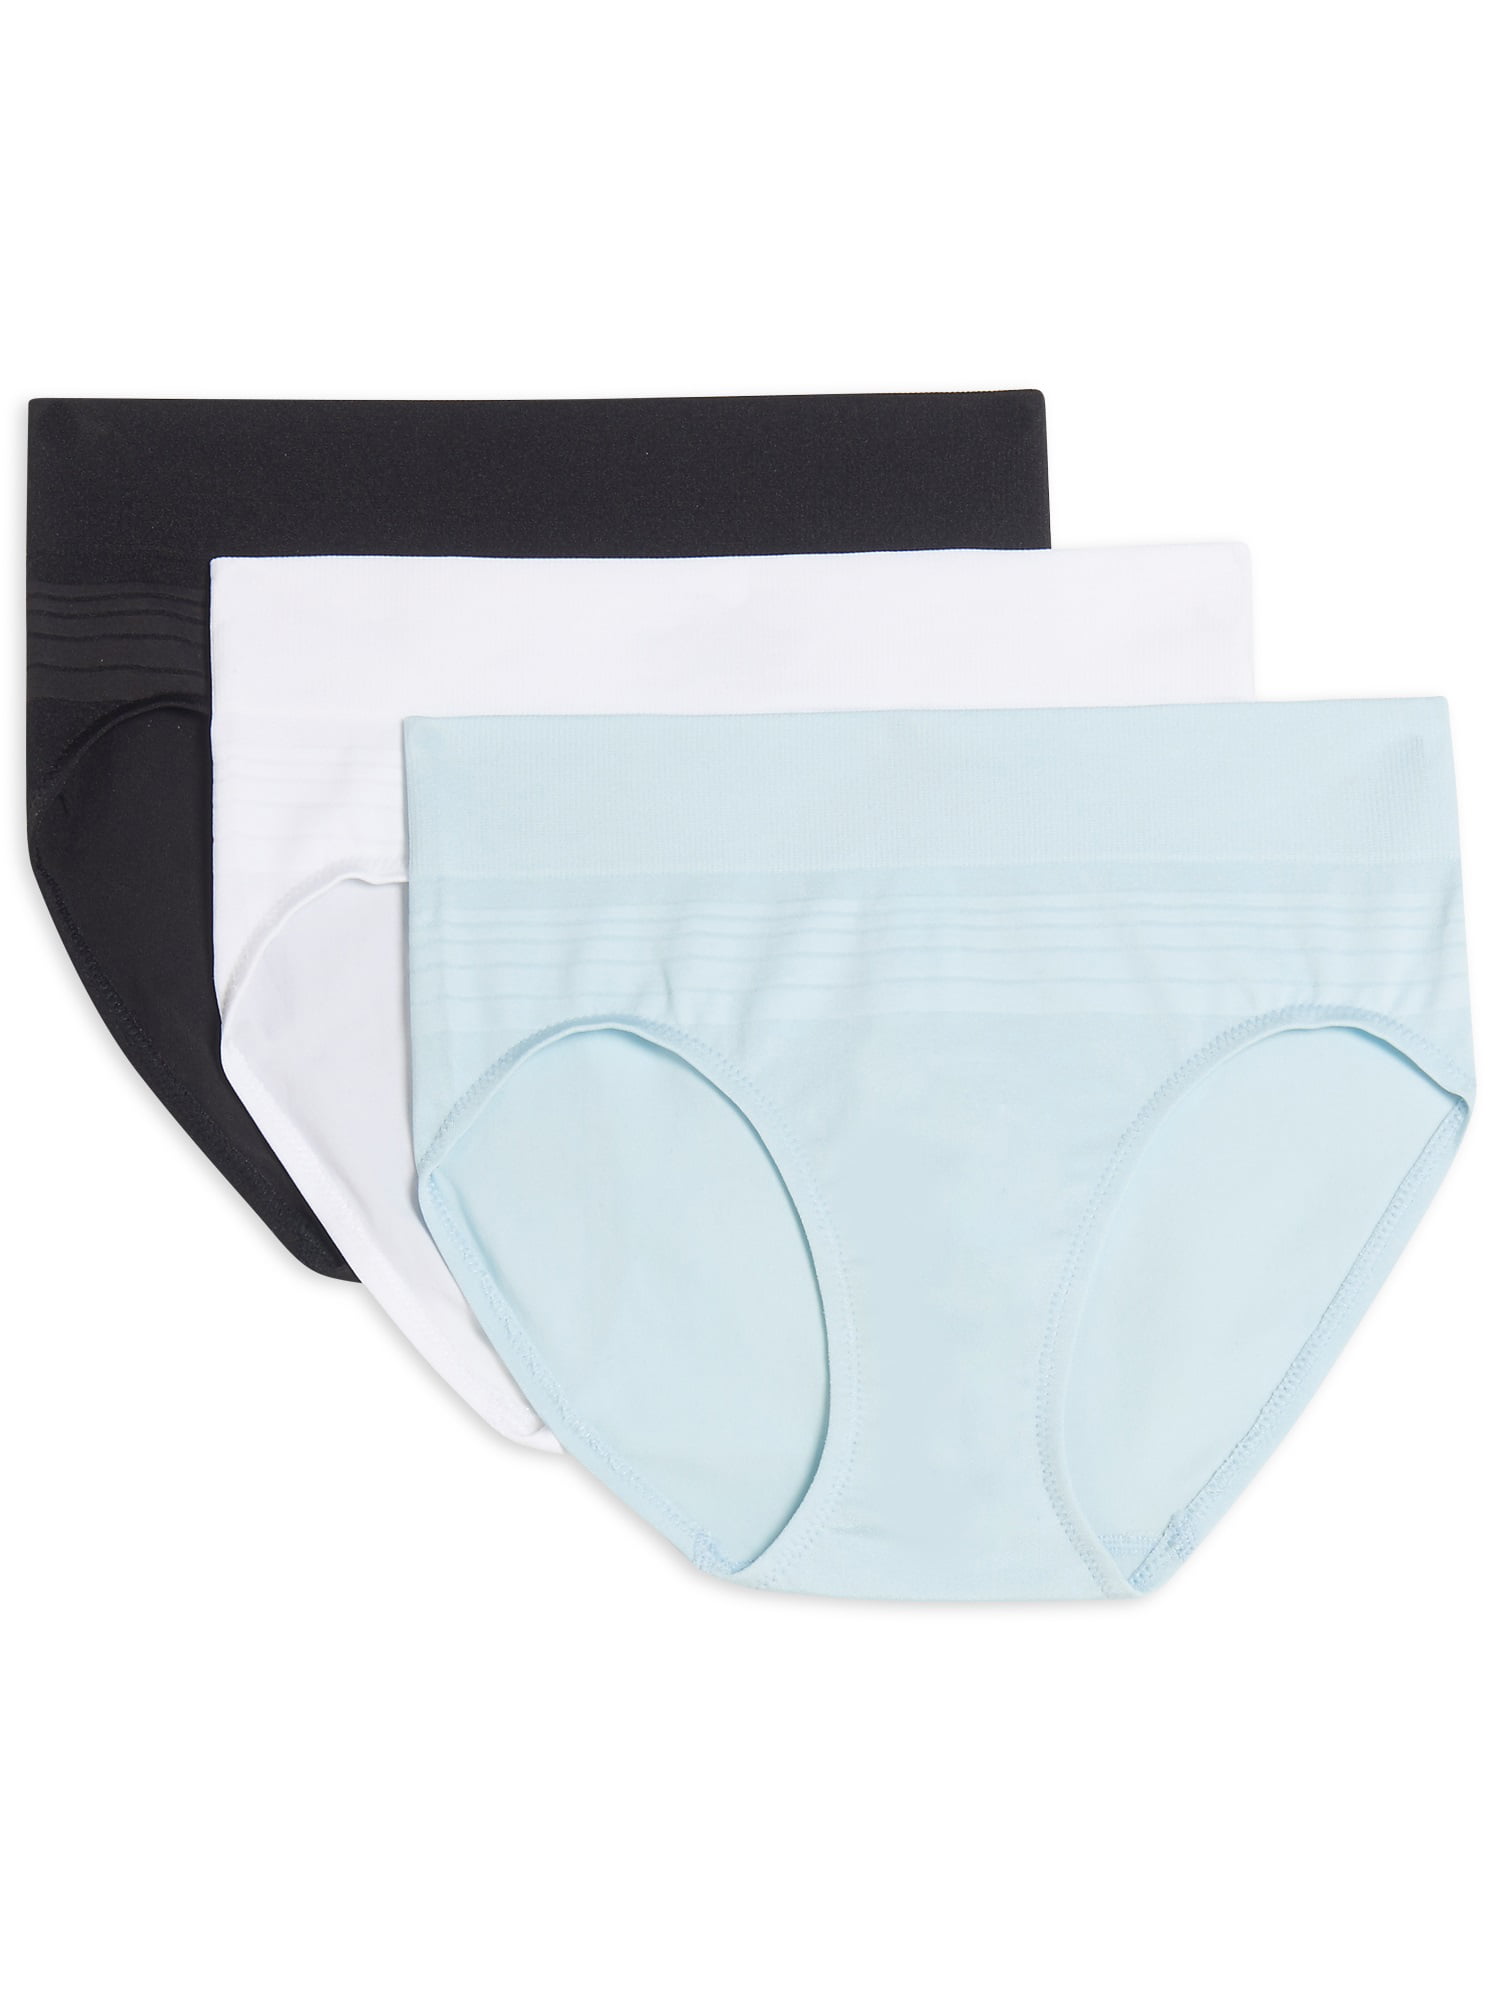 Blissful Benefits by Warner's No Muffin Top Hipster Panties 3pk for